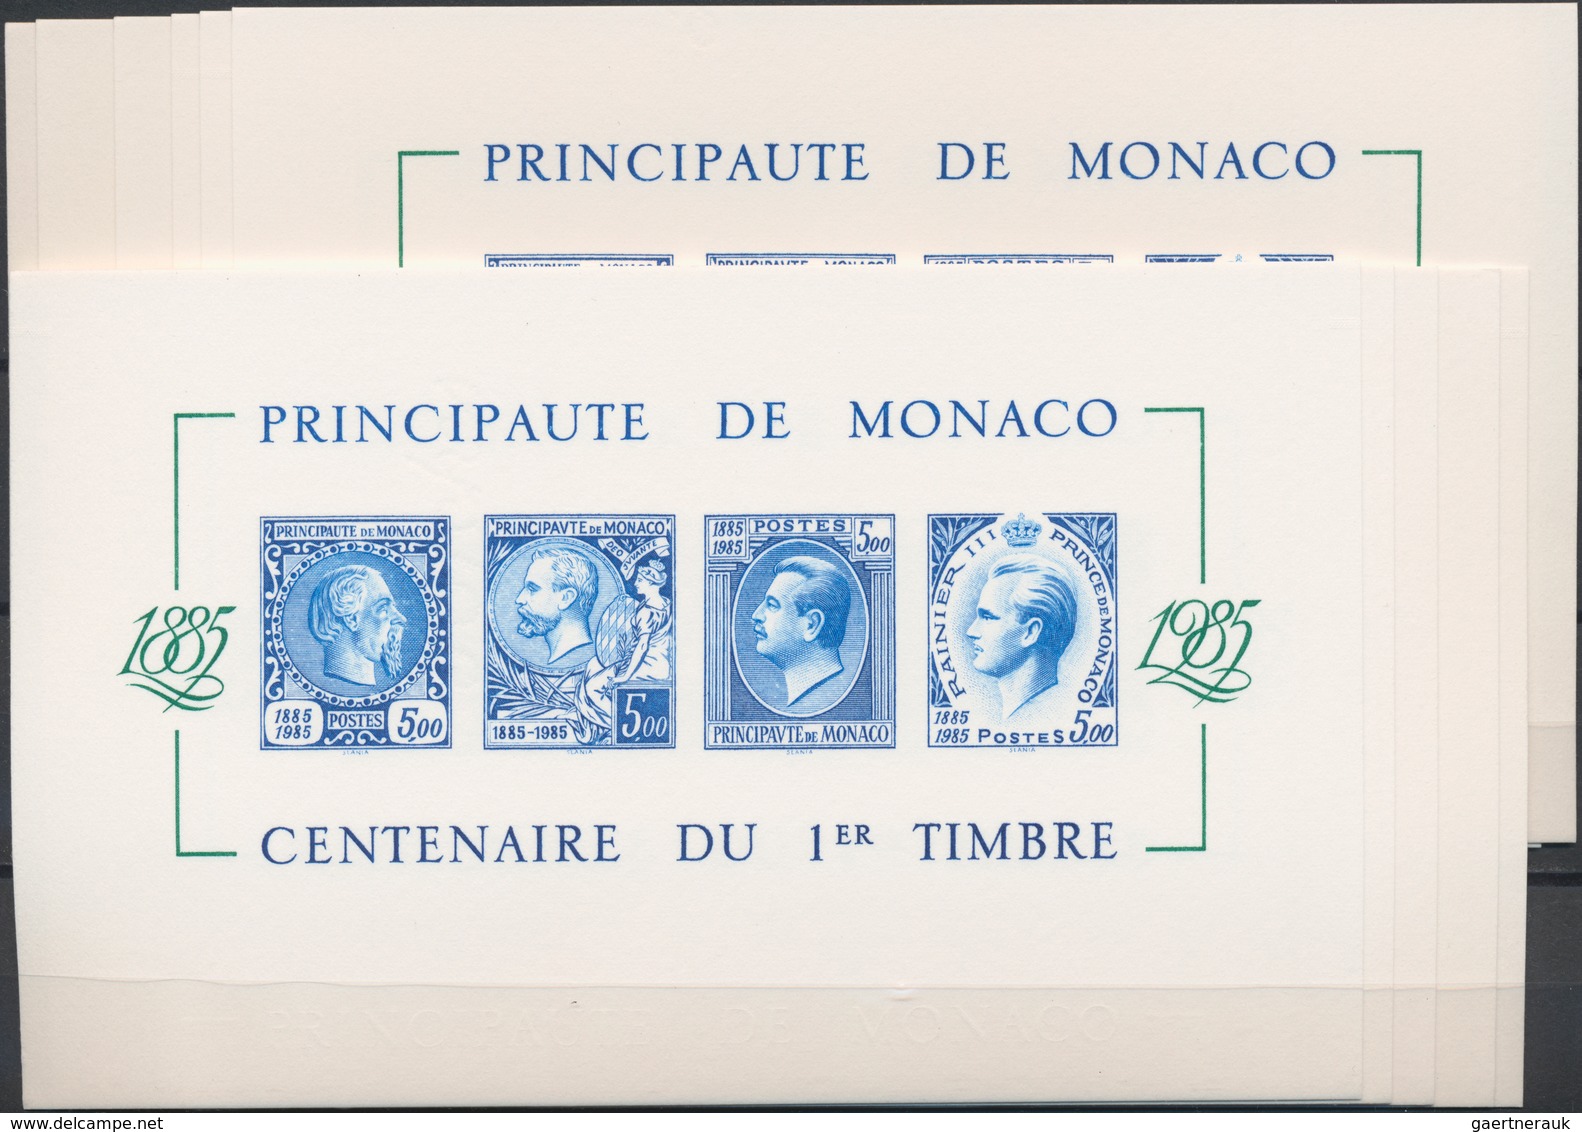 Monaco: 1985, Stamp Centenary Souvenir Sheet, Epreuve De Luxe On Thick Watermarked Paper And Colourl - Used Stamps